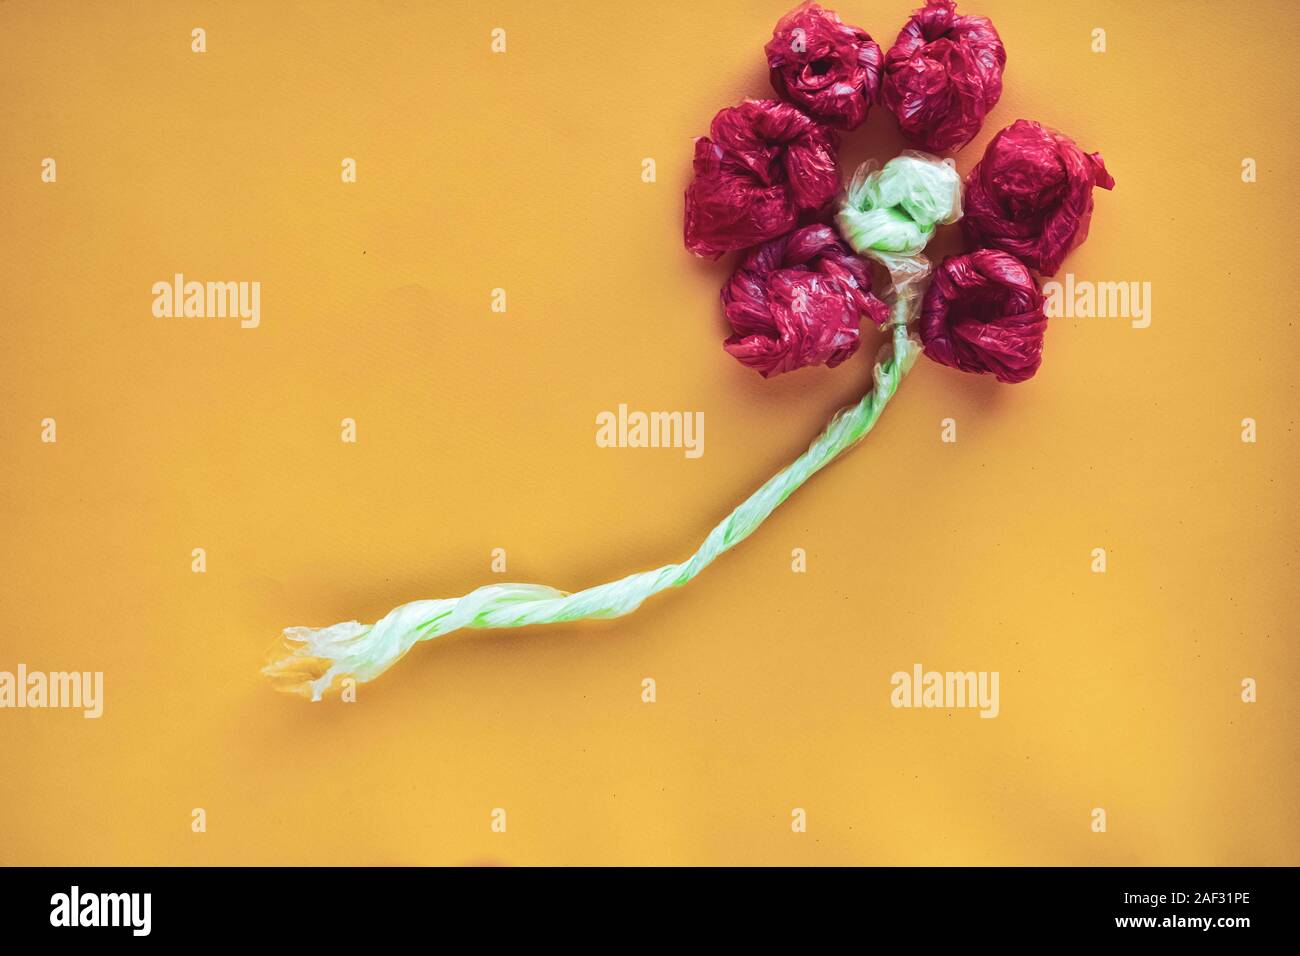 Flower made of rolled colorful plastic bags. Recycling and waste reducing concept. Top view. Stock Photo